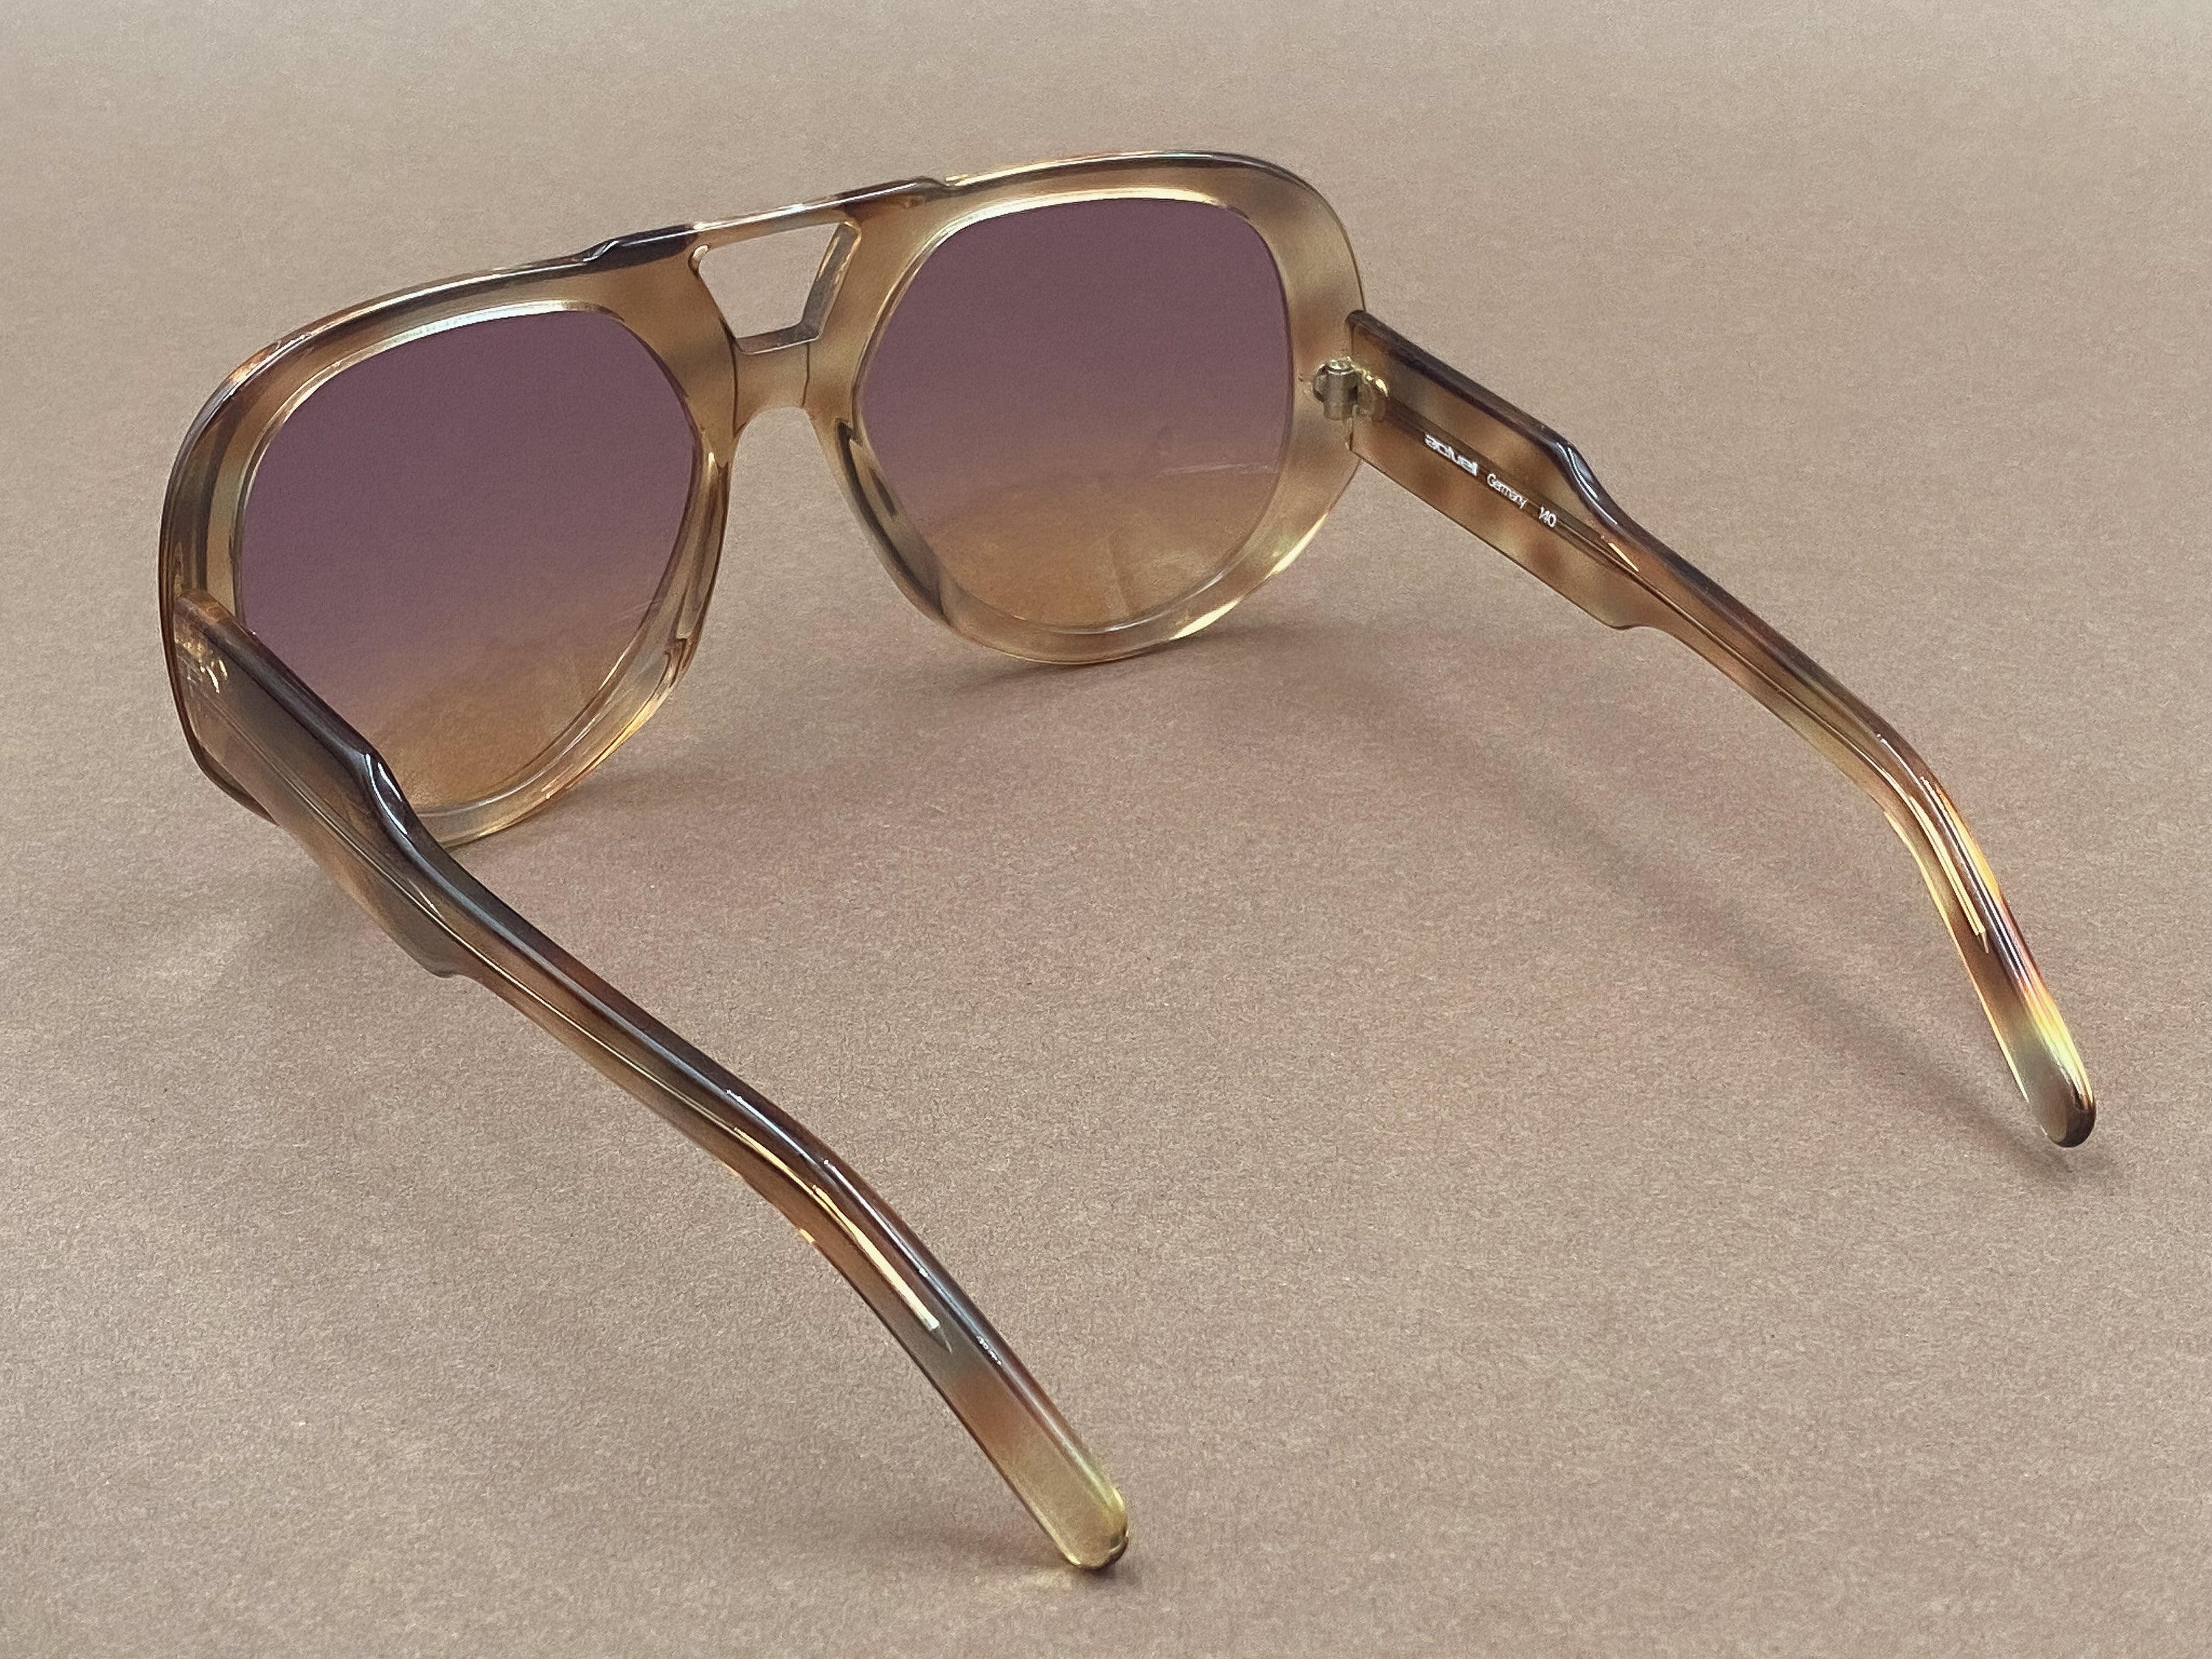 Actuell Couture 114 sunglasses